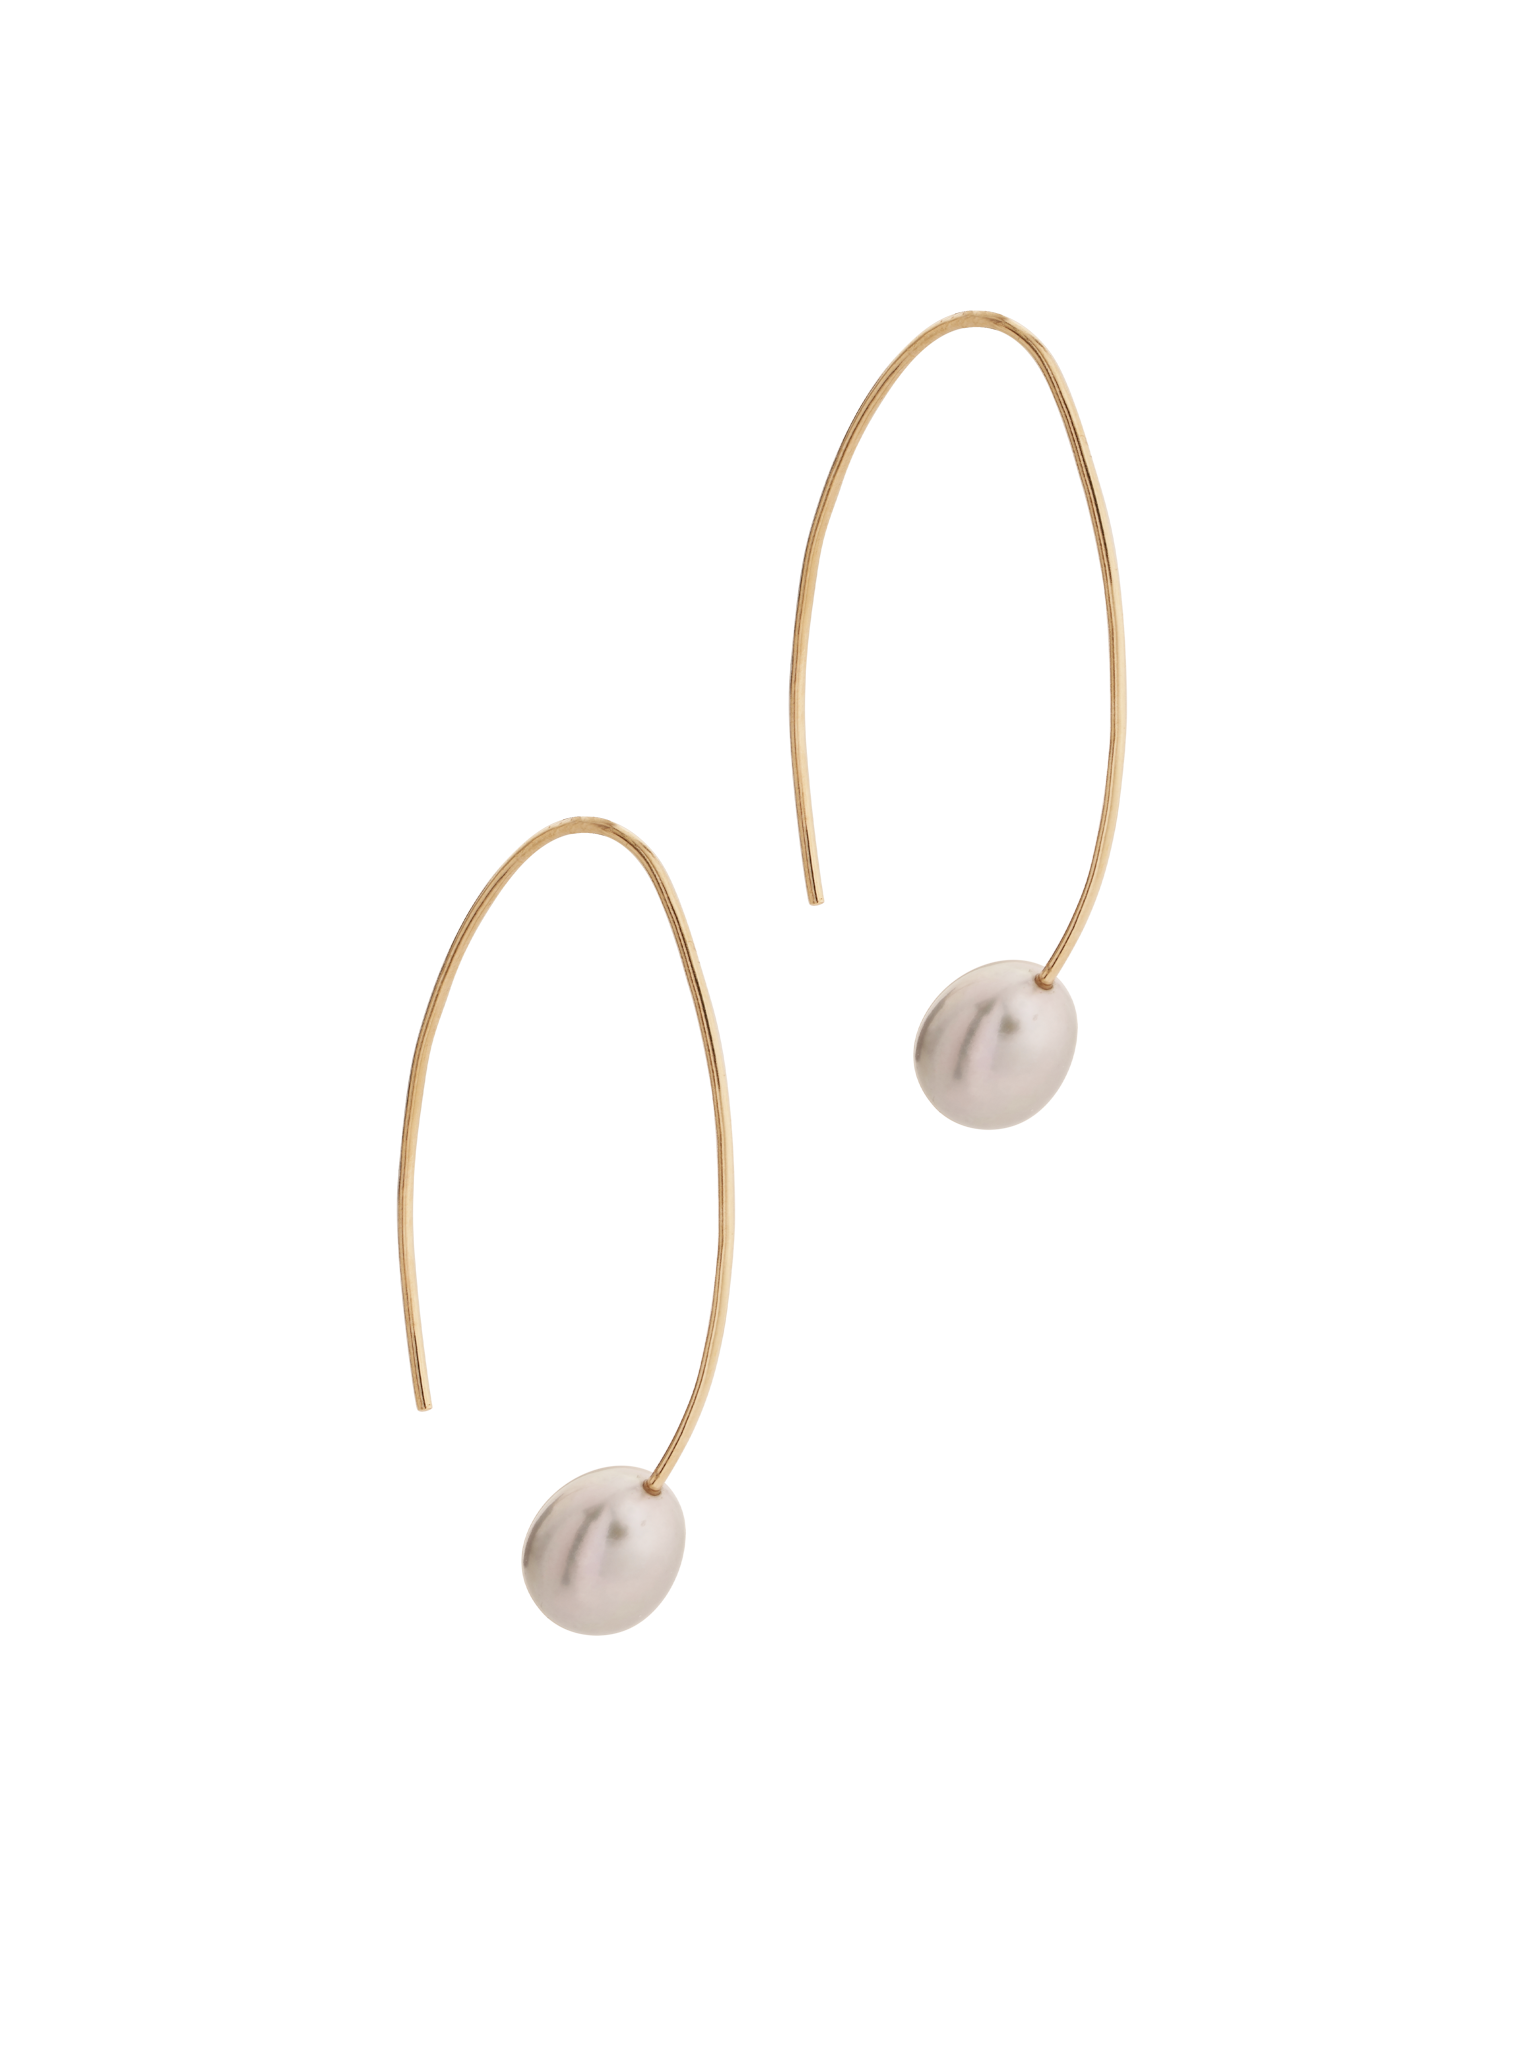 Aphrodite lavender pearl wires, 14ct yellow gold